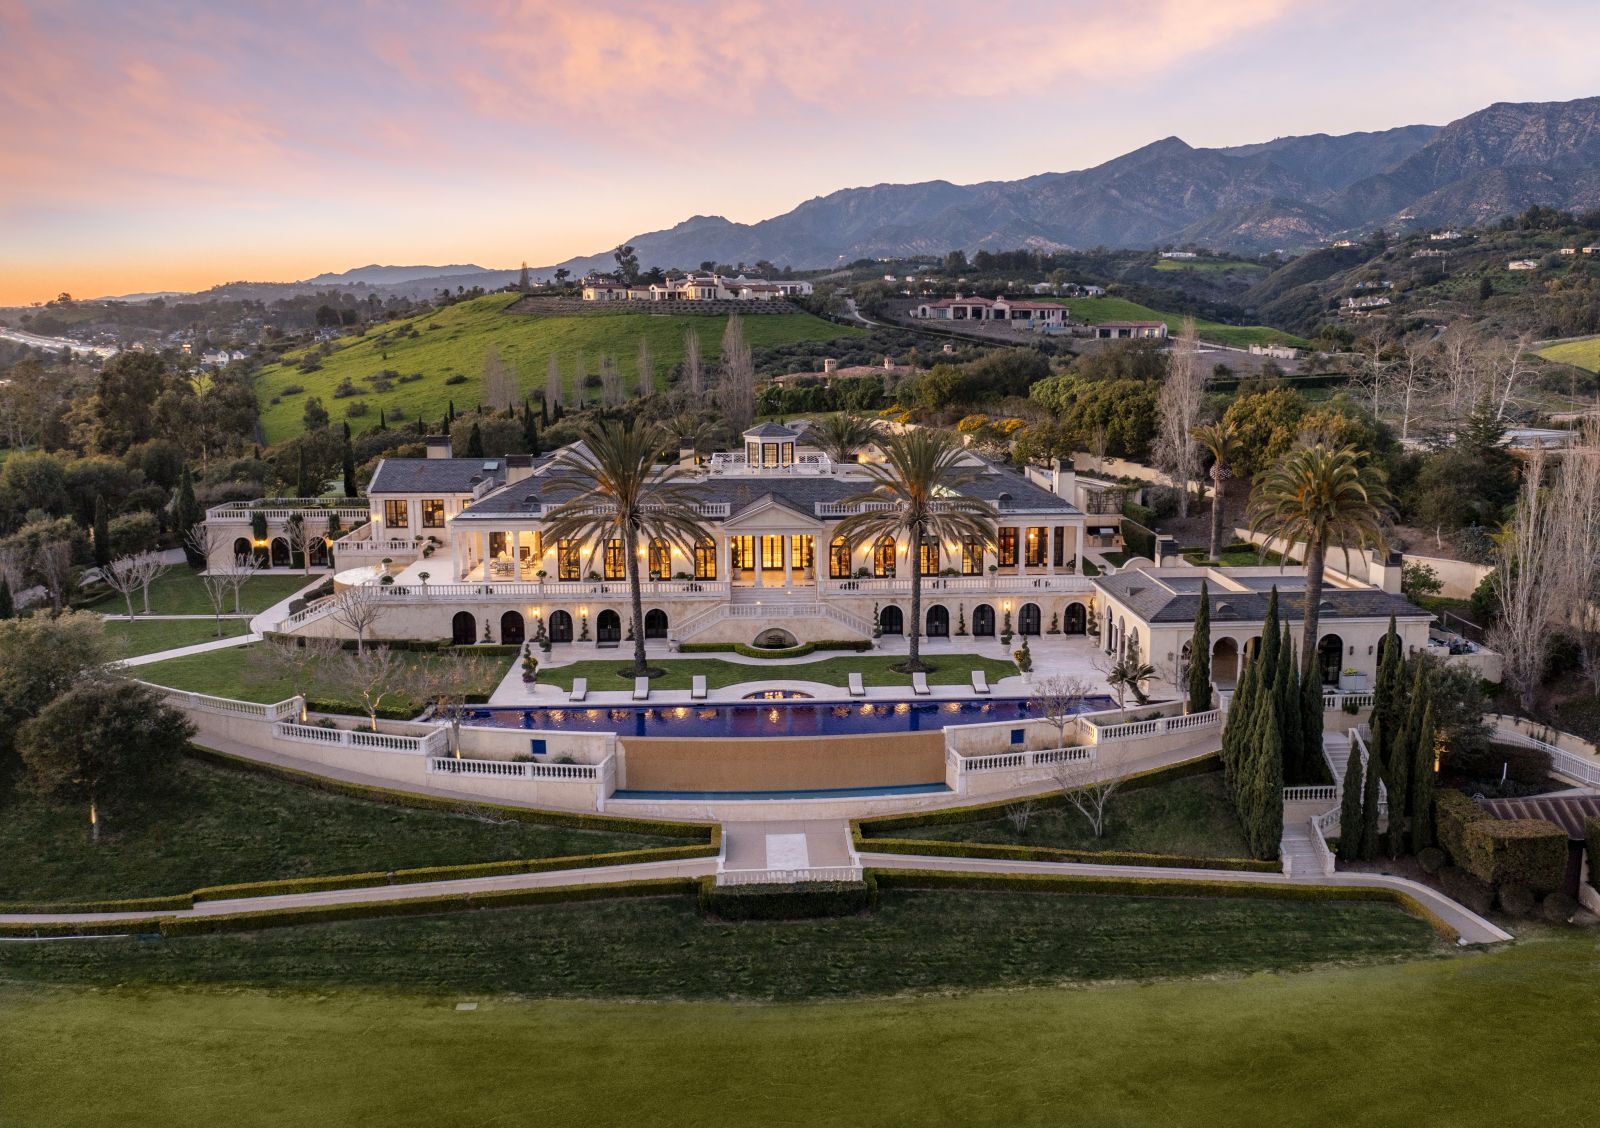 The Bella Vista Estate, one of the grandest estates in North America perched in the Santa Ynez Mountain foothills near Montecito with two tall palm trees and lots of lush greenery plus a pool and private polo field in the foreground